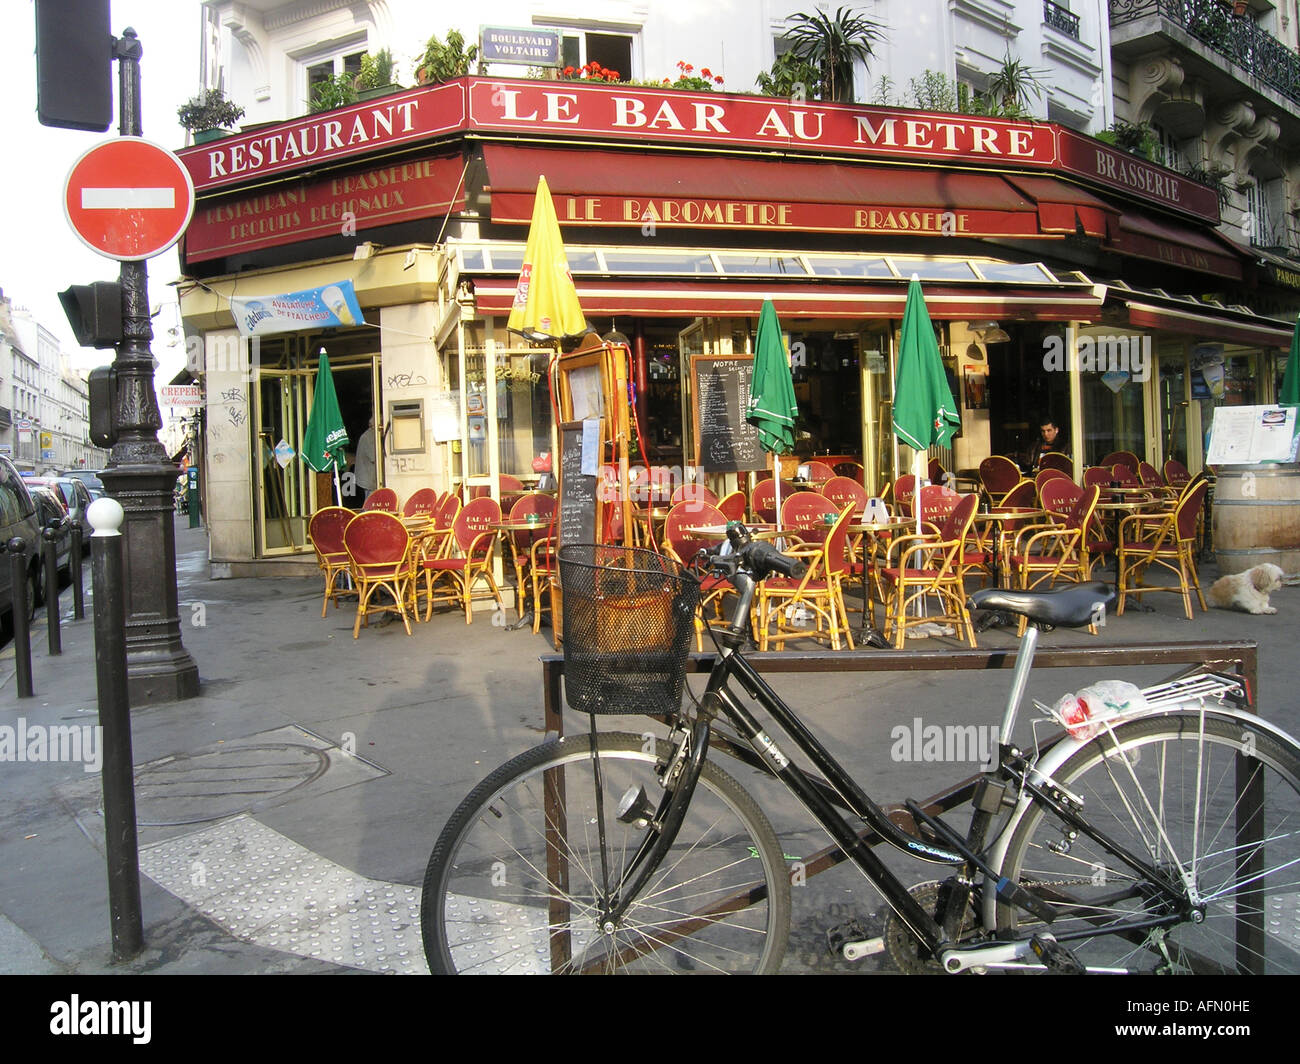 early morning scene at roadside cafe Le Bar au Metre in Boulevard Voltaire Paris France Stock Photo